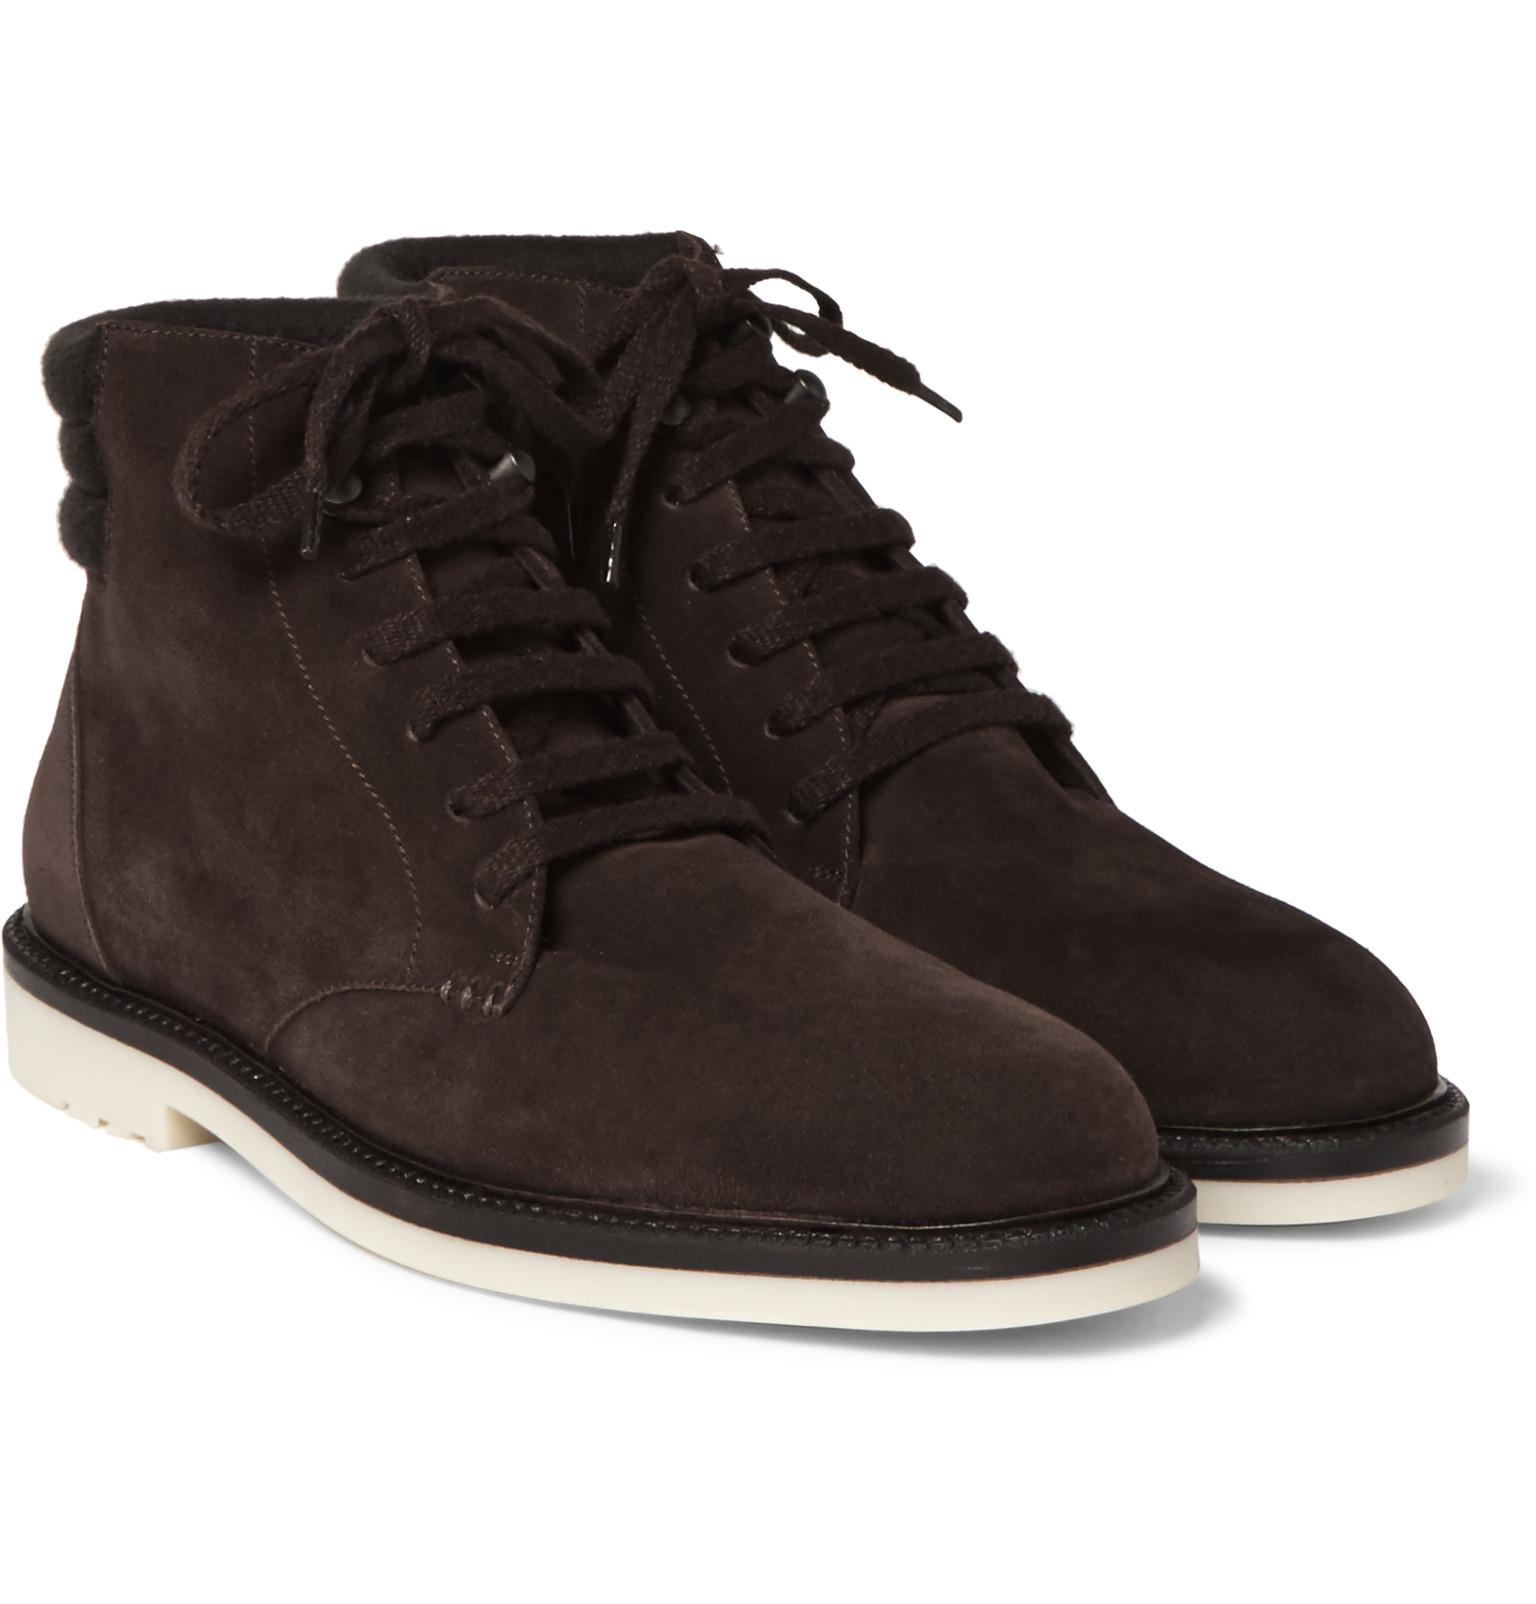 Lyst - Loro Piana Icer Walk Cashmere-trimmed Suede Boots in Brown for Men